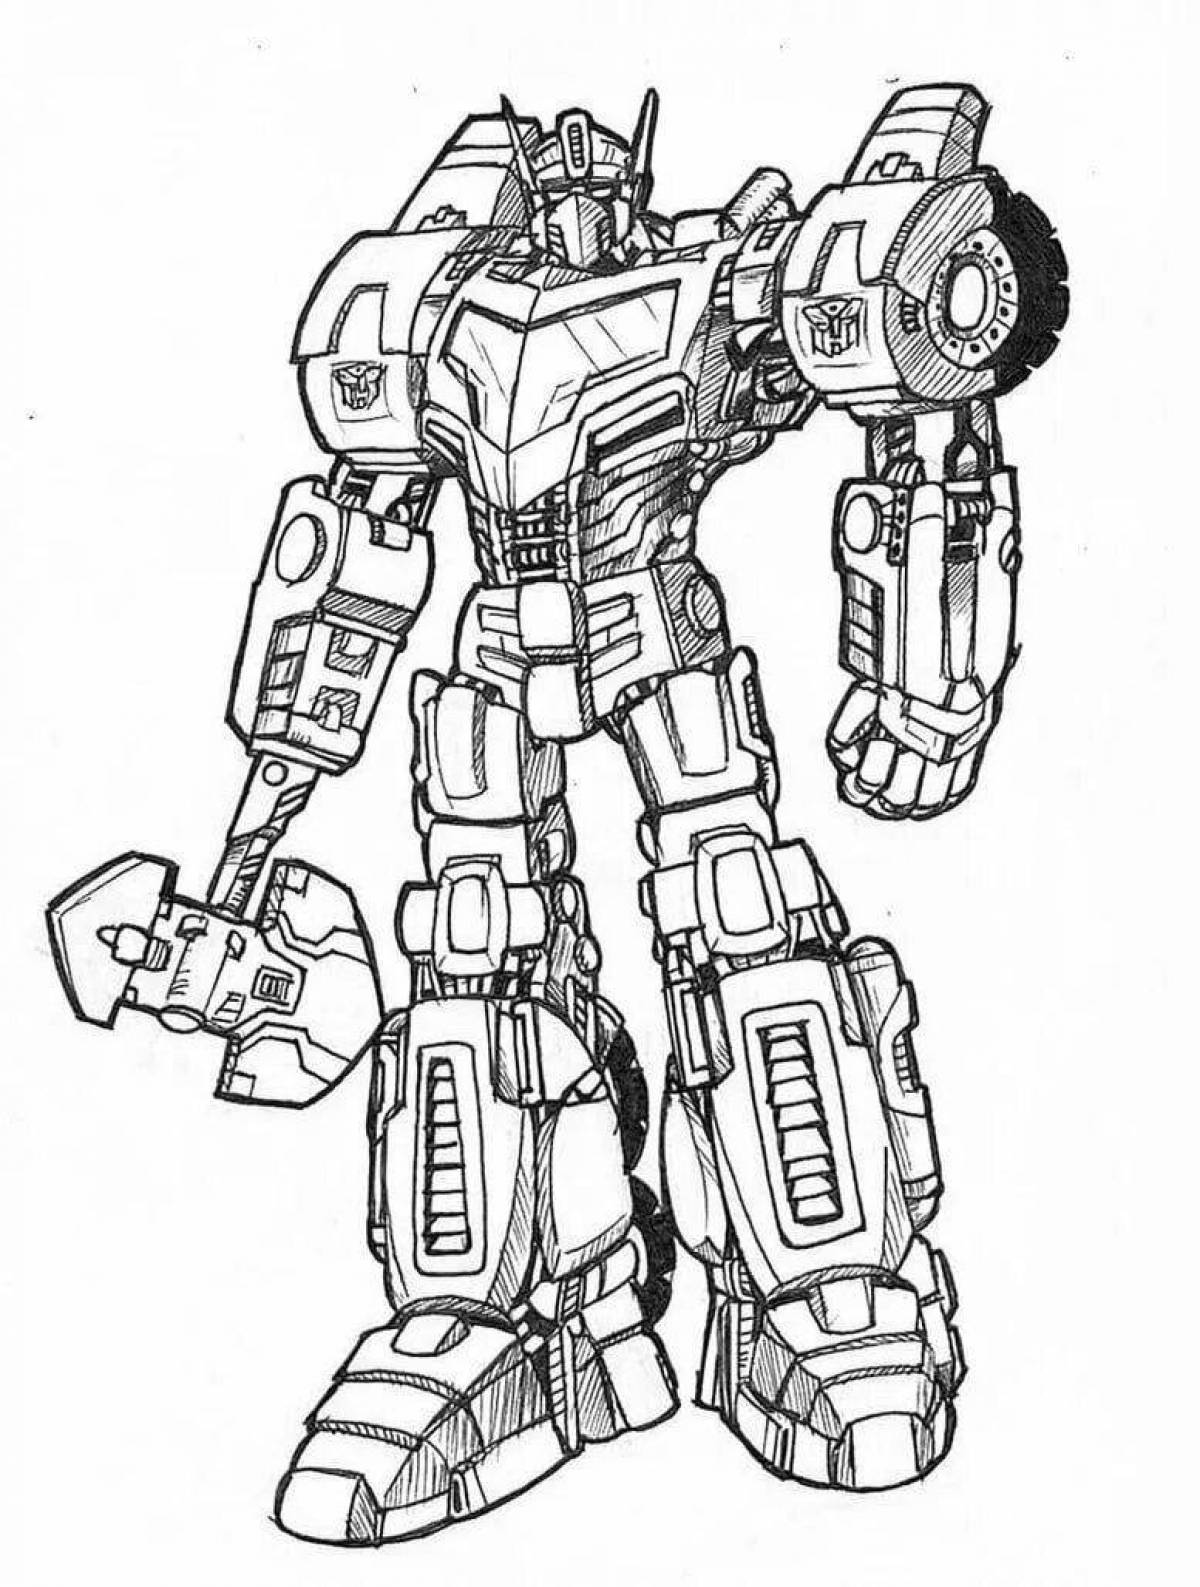 Gorgeous Autobots coloring pages for kids